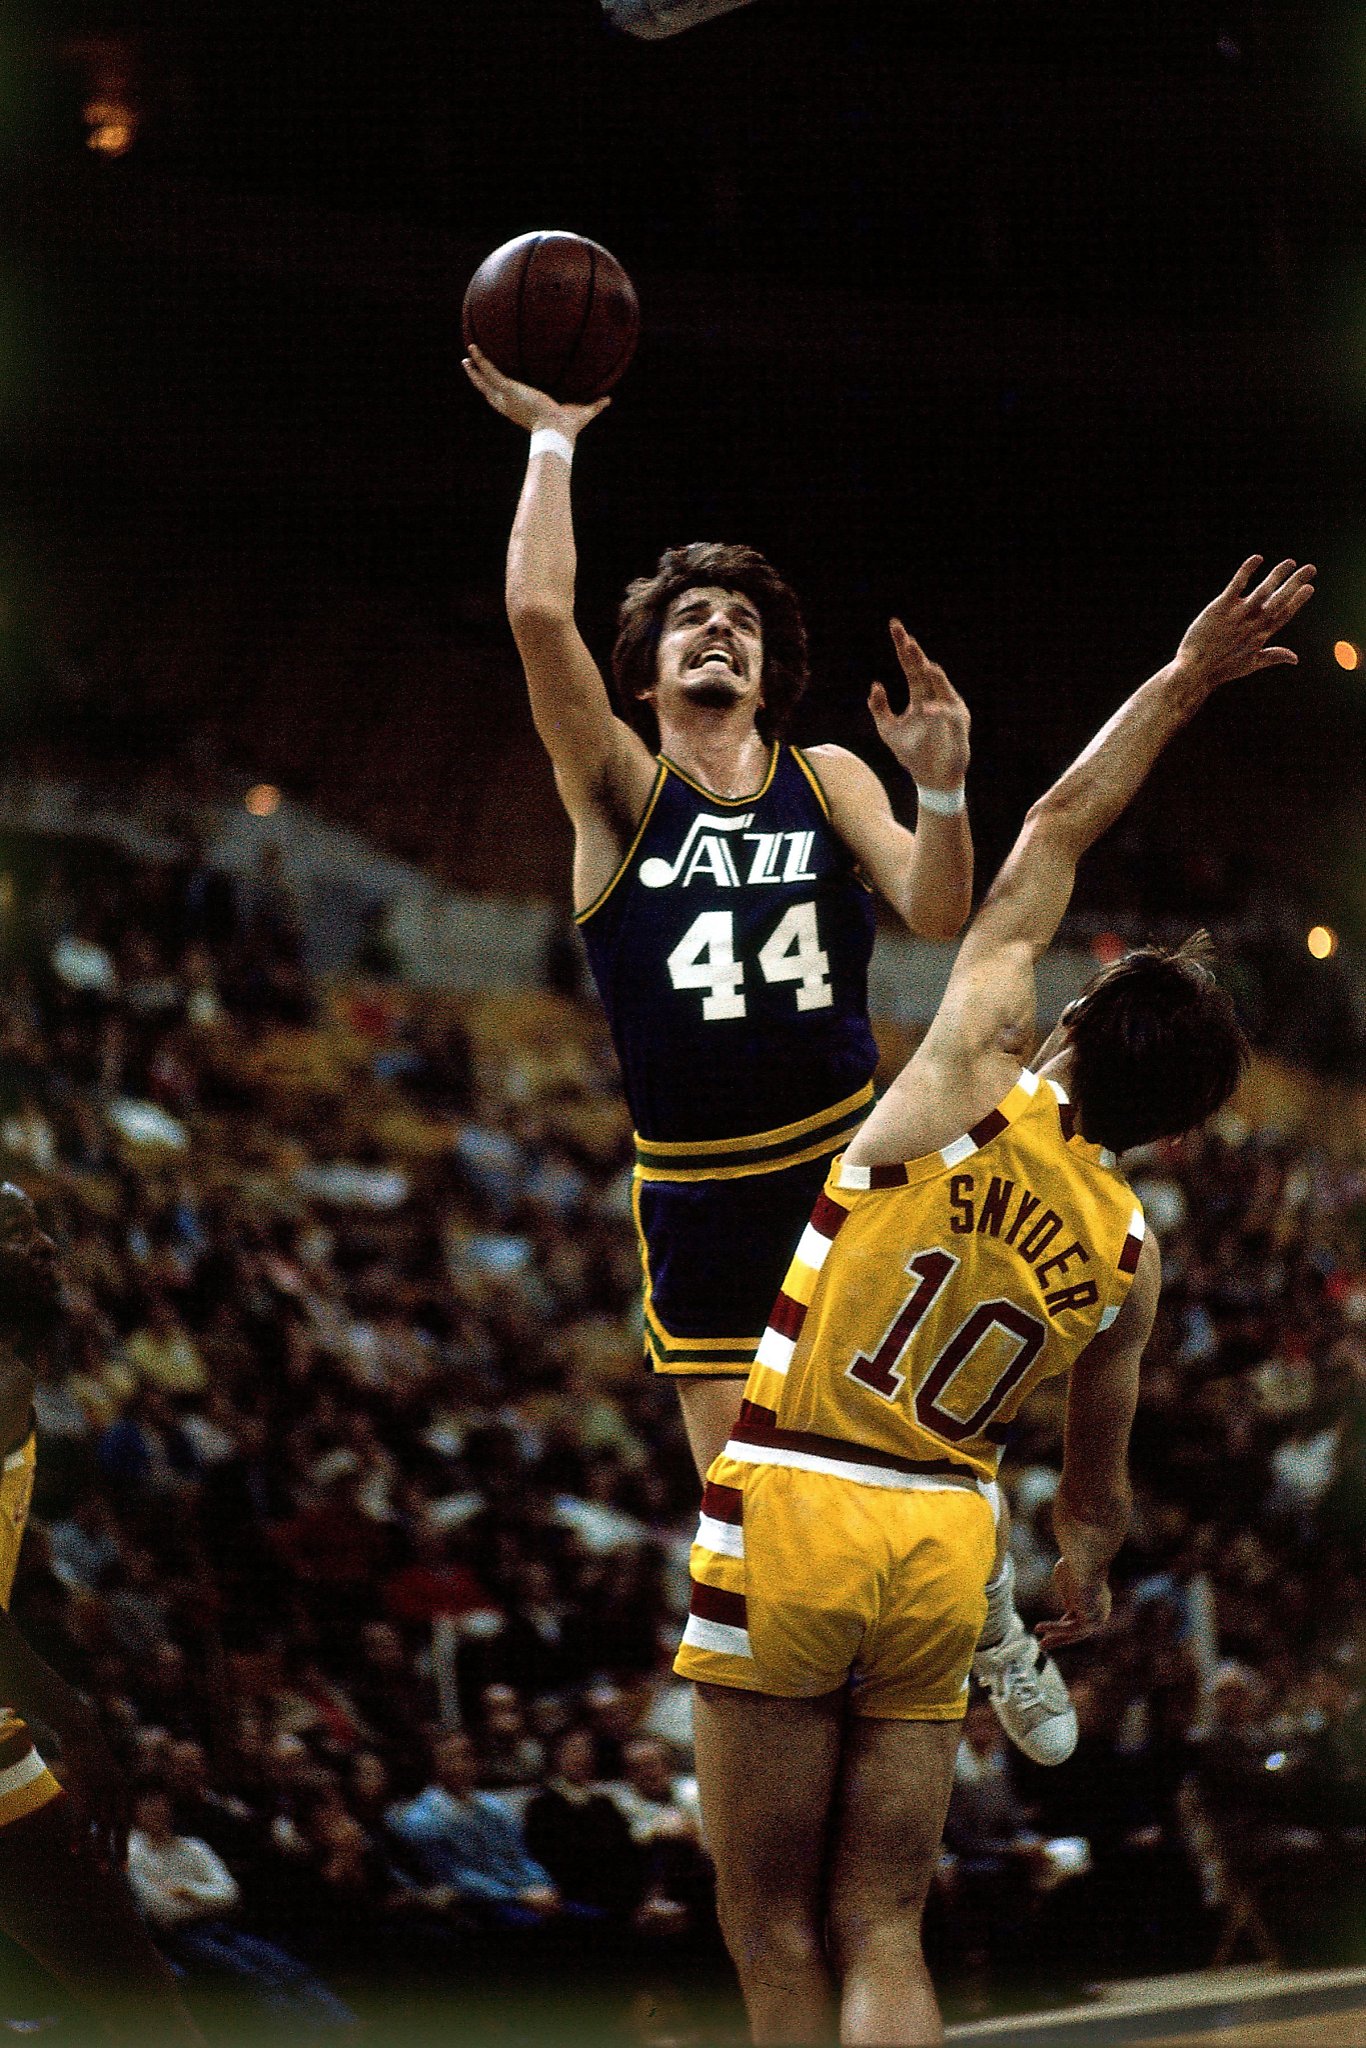 Ostler: Before there was Curry, 'Pistol Pete' stole the show